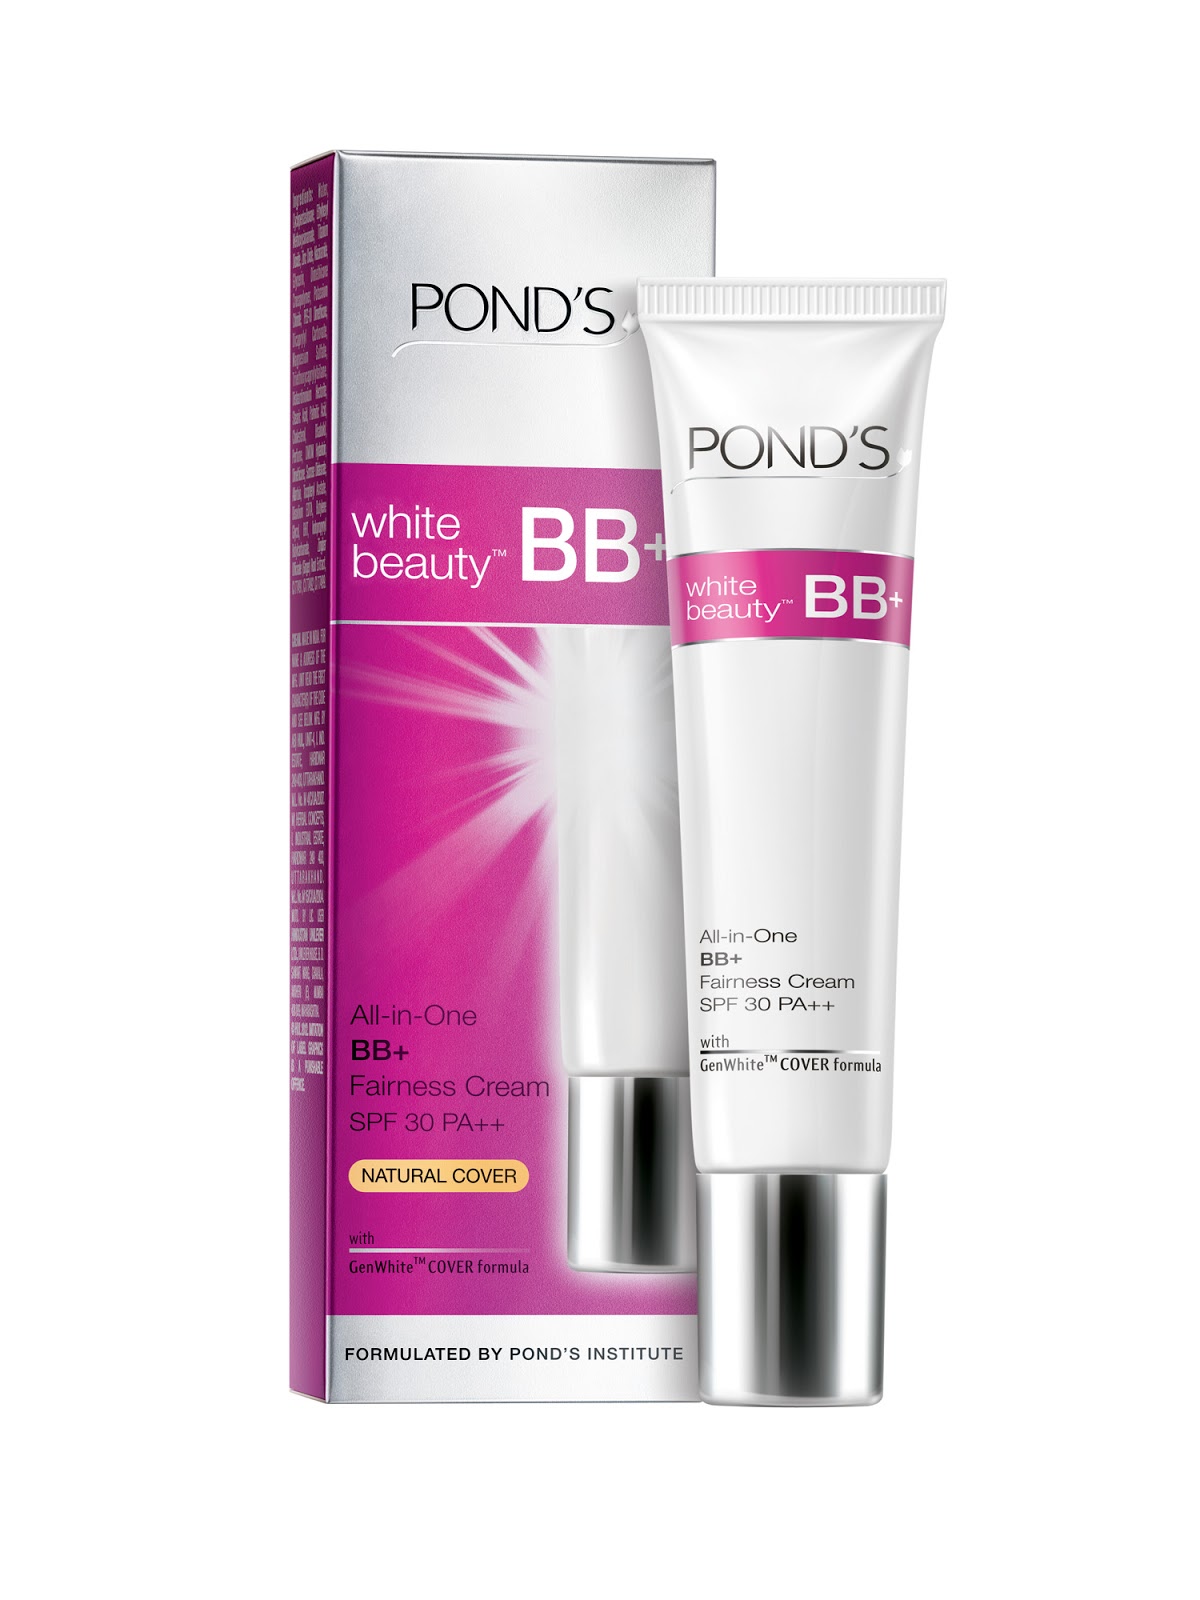 All that she lovess: NEW LAUNCH: POND'S WHITE BEAUTY 